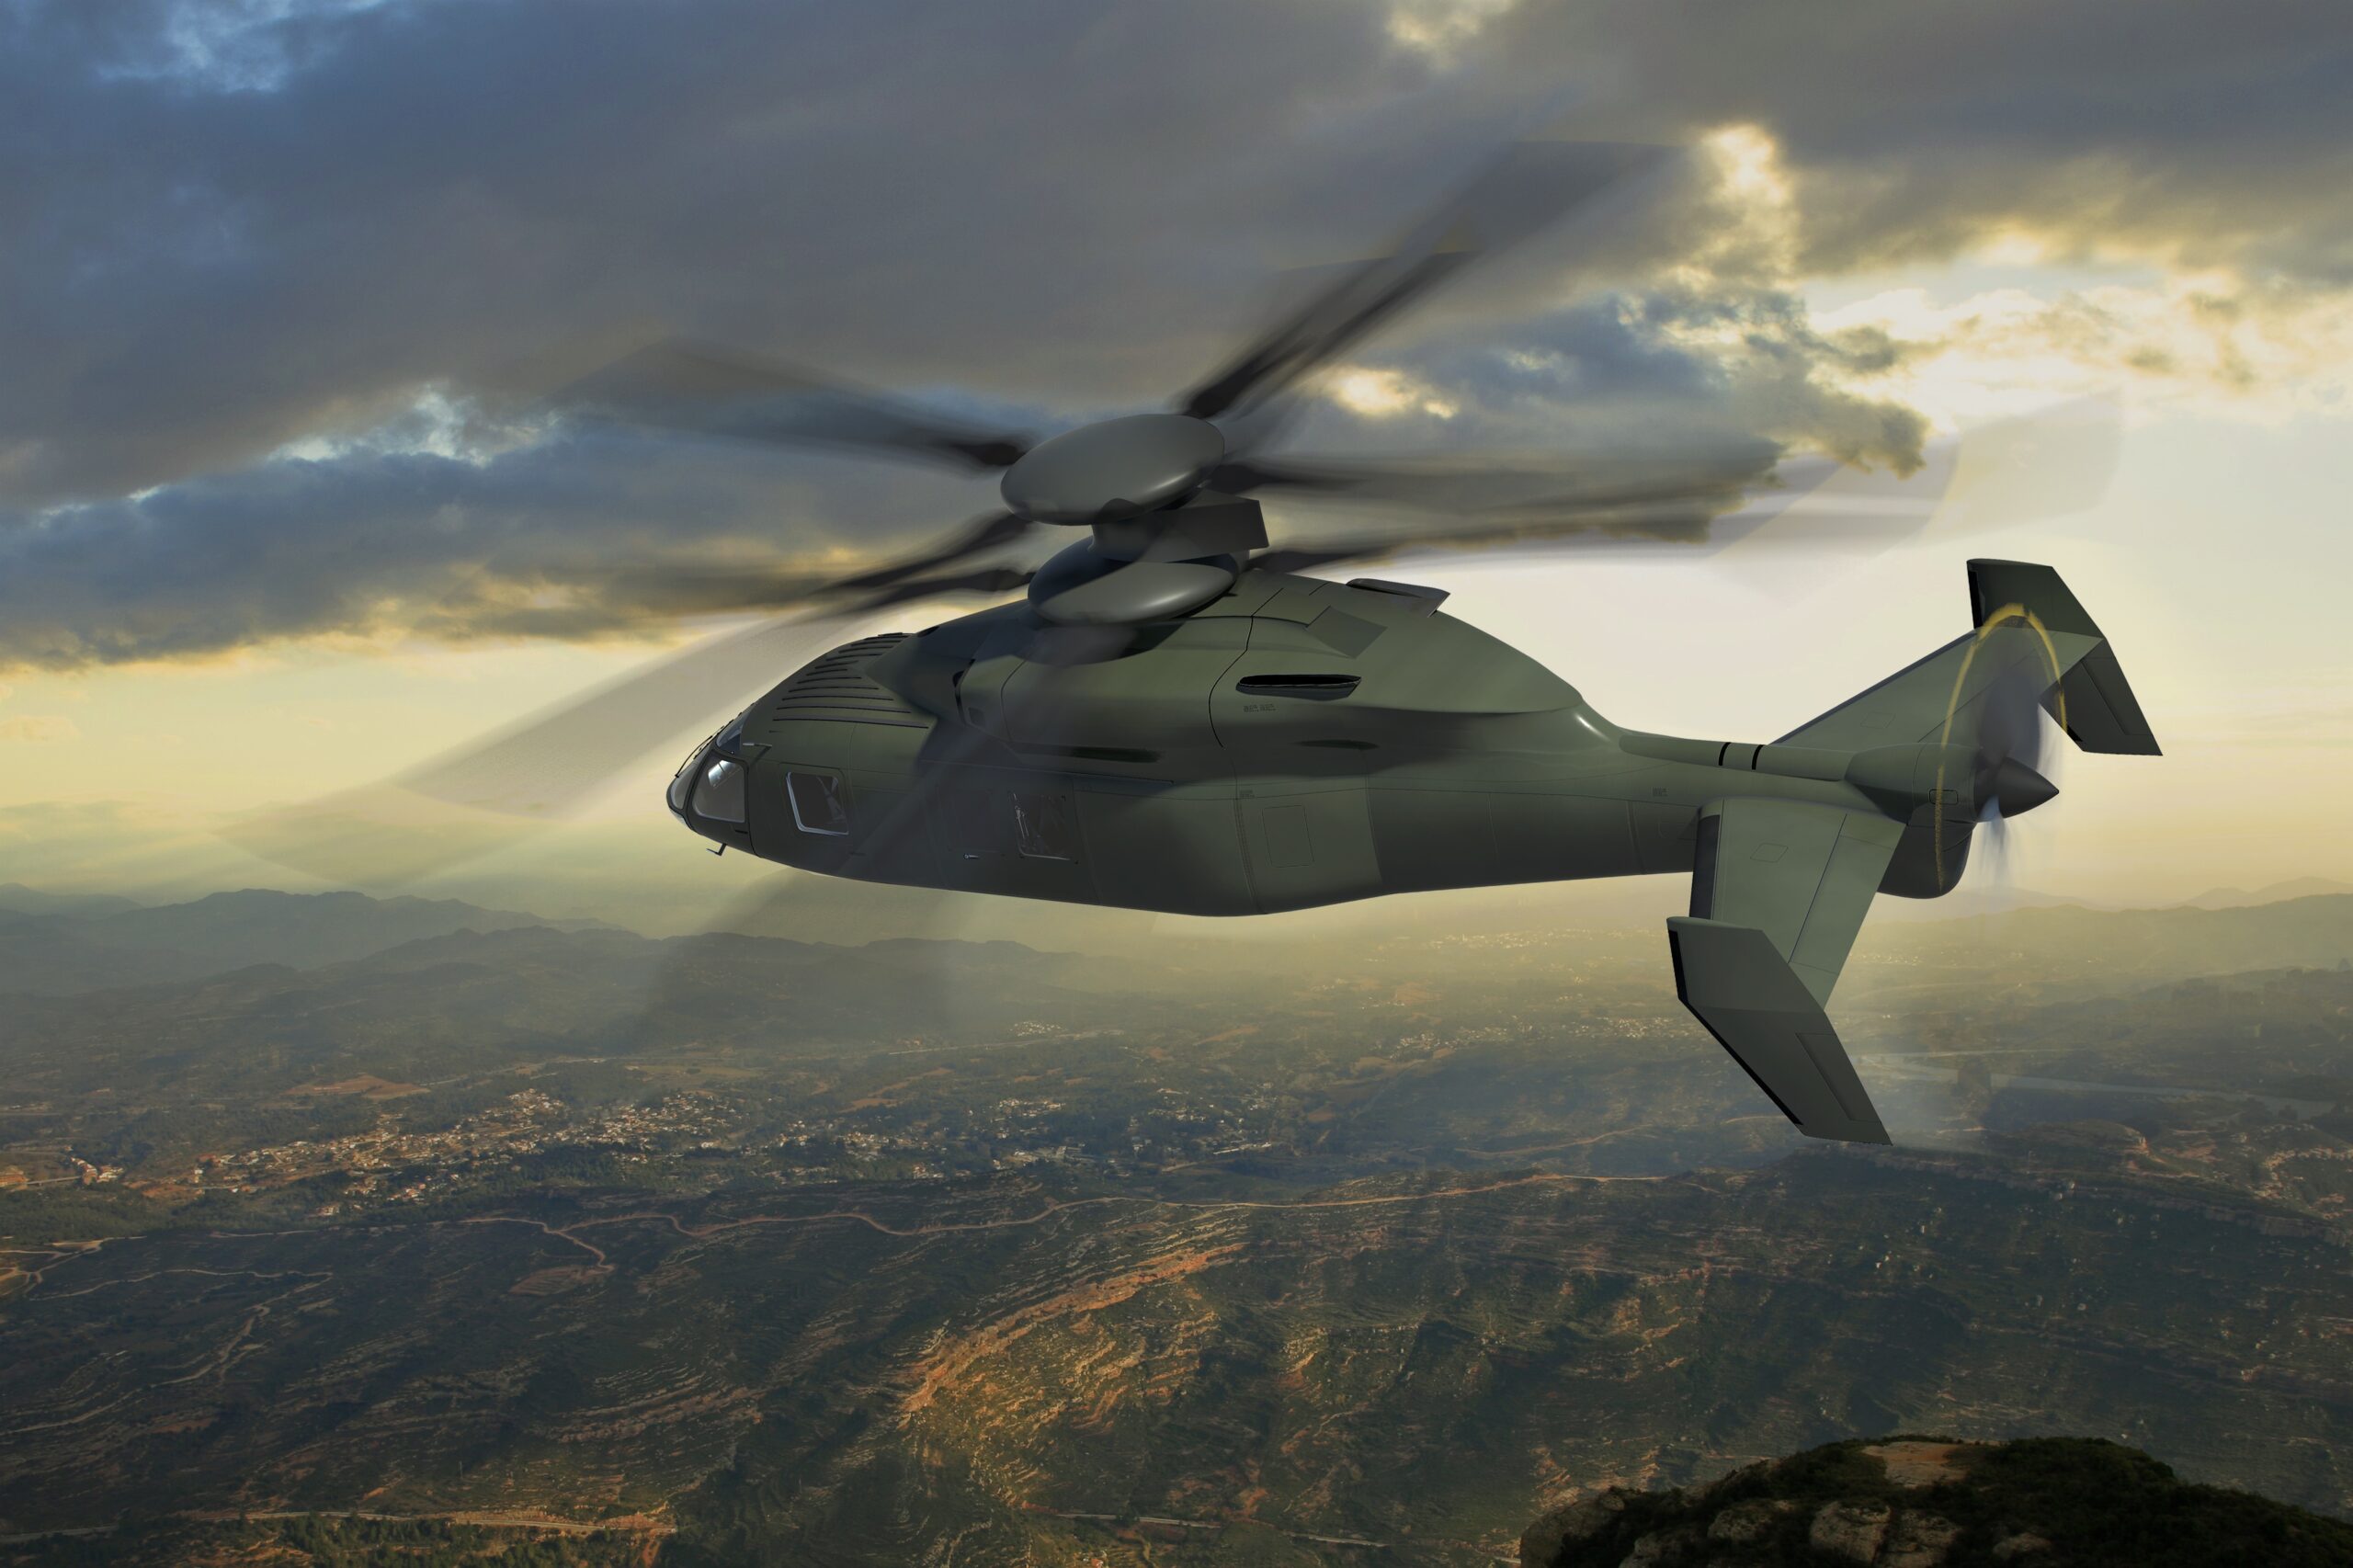 Bell V-280 Vs. Sikorsky-Boeing SB>1: Who Will Win Future Vertical Lift?